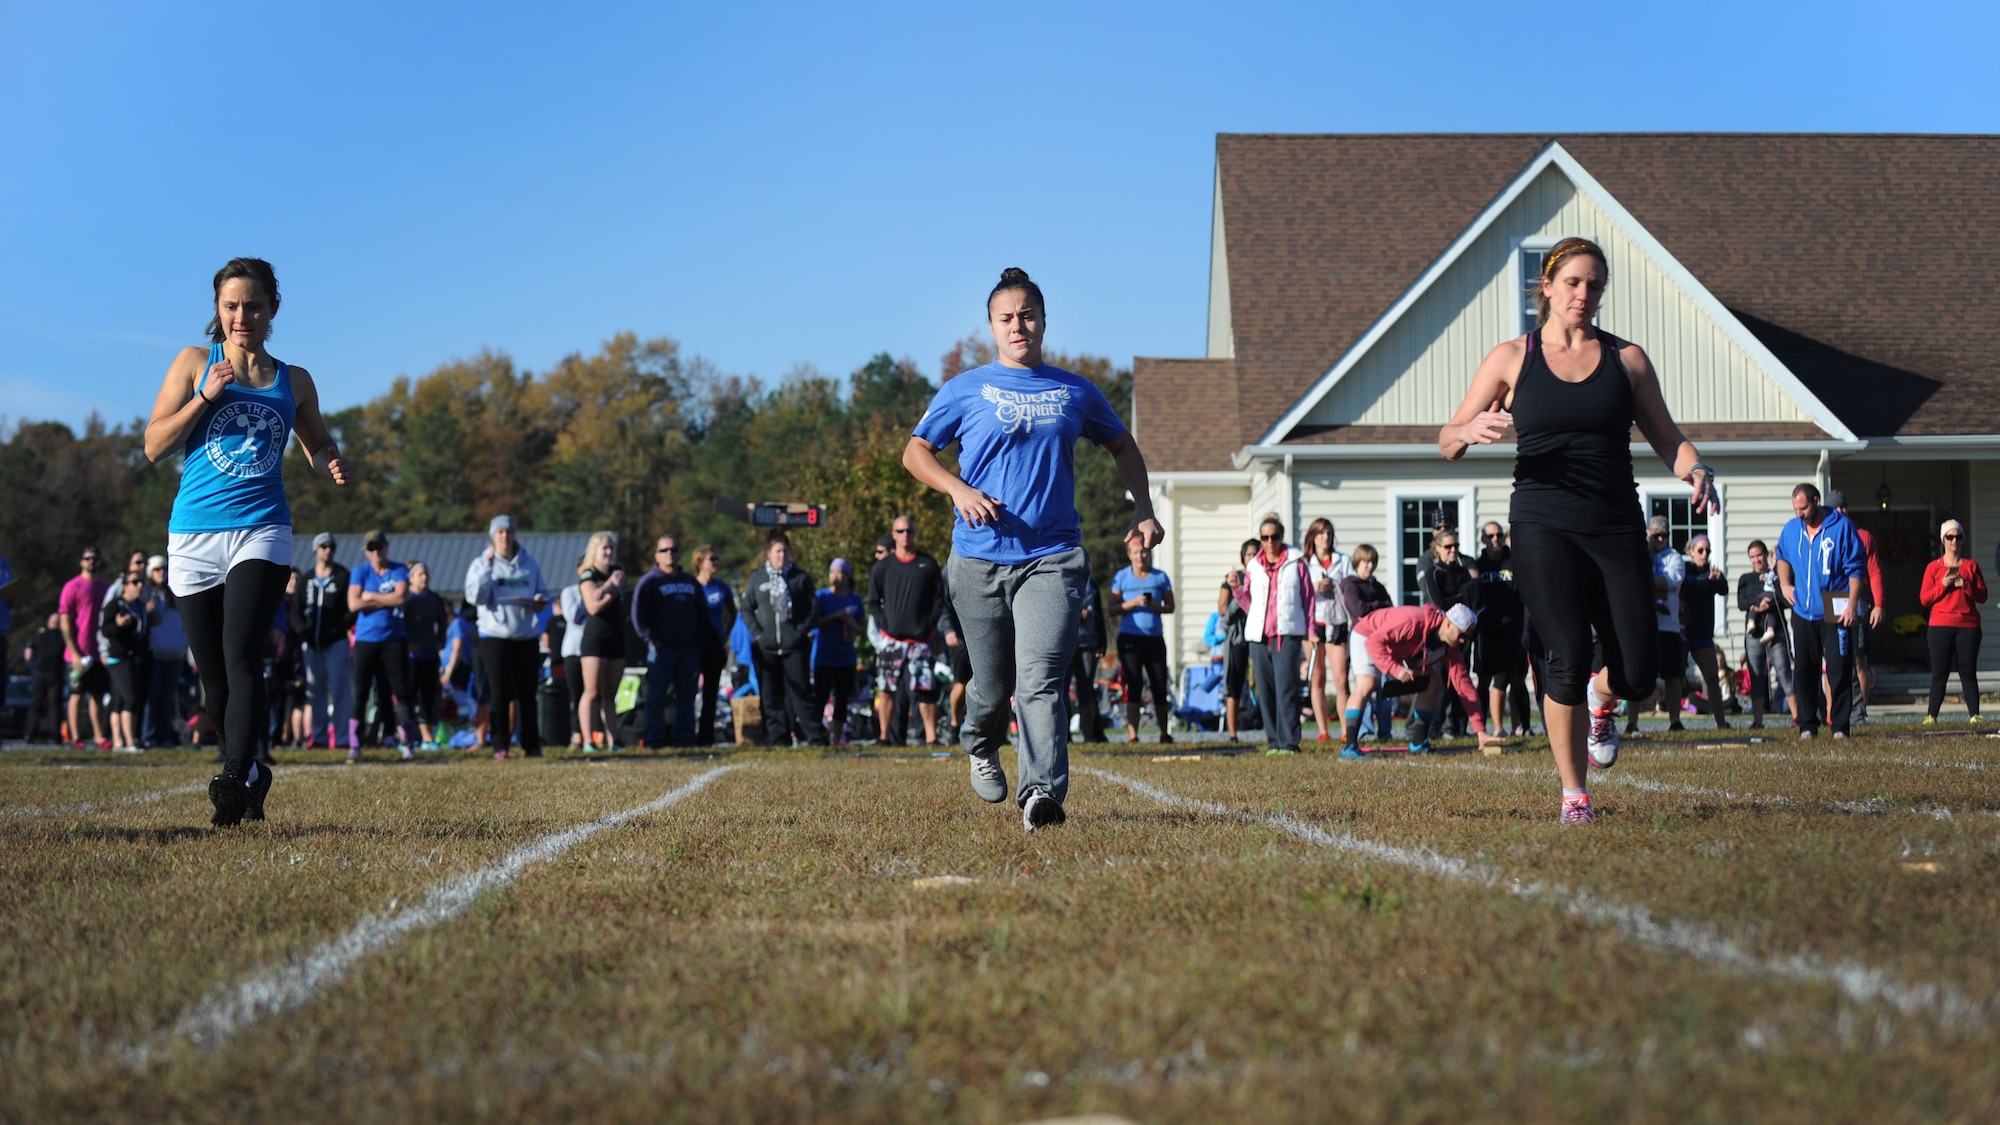 Airman 1st Class Karla Montes, 436th Dental Squadron dental assistant, center, competes in the first workout of the day in the Eastern Shore Affiliate Challenge Oct. 17, 2015, in Georgetown, Del. The challenge included three events consisting of a shuttle under, clean and jerk ladder and hang cleans including bar facing burpees. (U.S. Air Force photo/Staff Sgt. Elizabeth Morris)